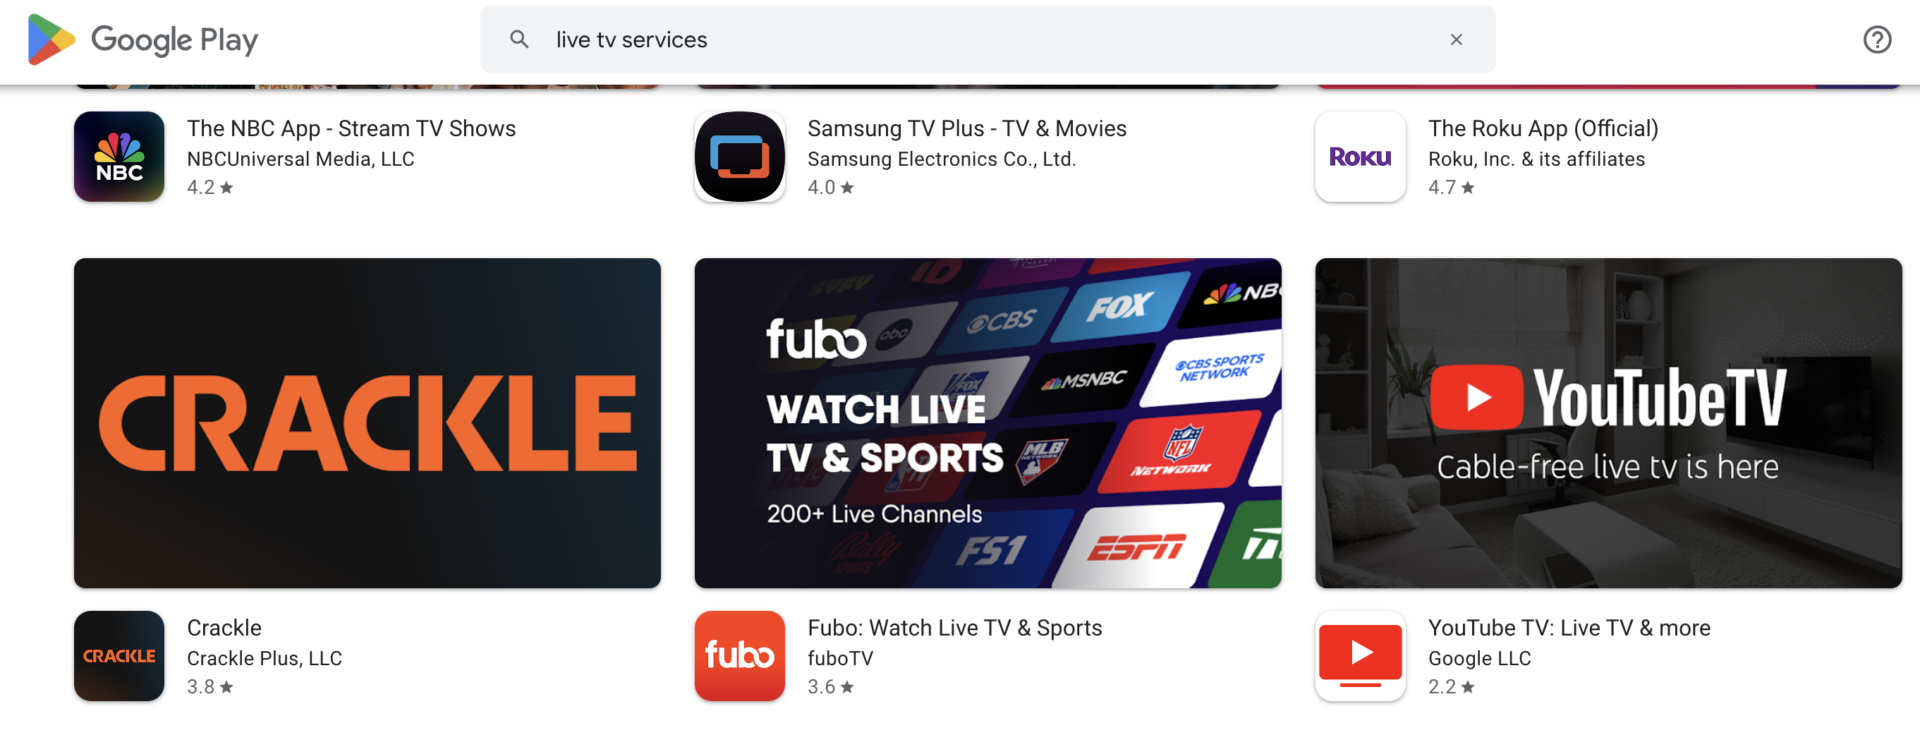 Live TV Services in Google Play